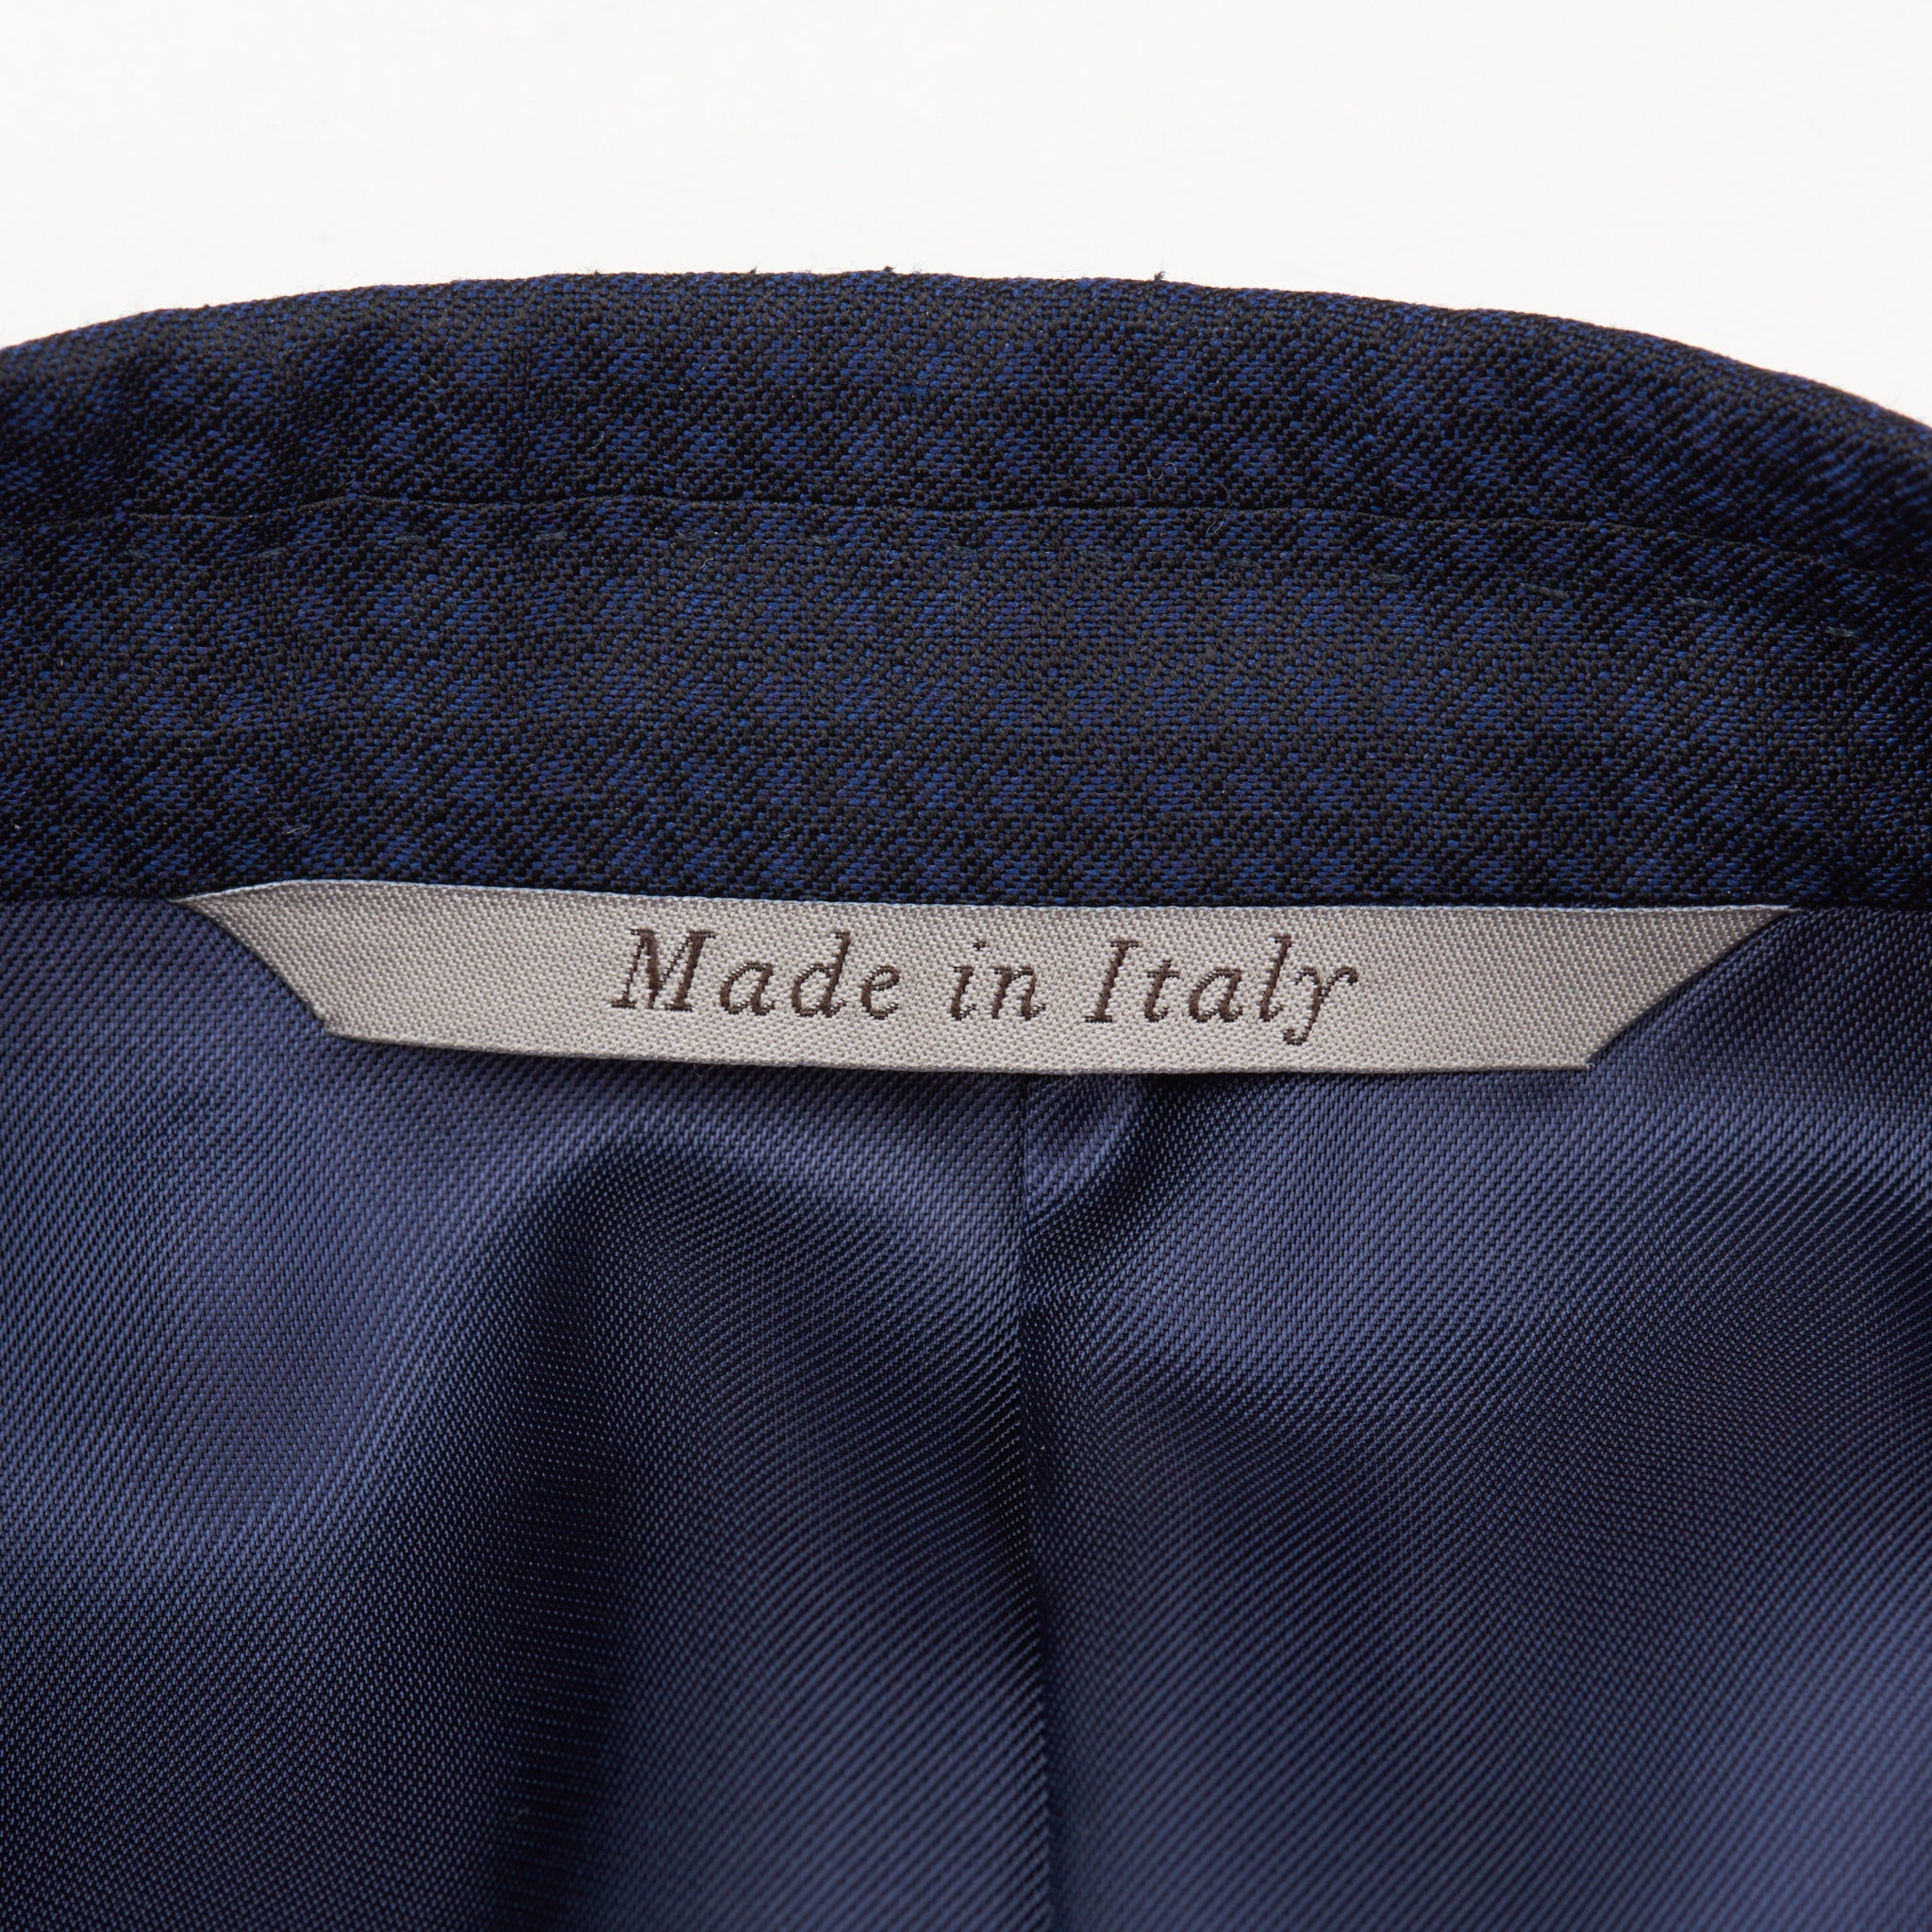 CANALI 1934 "Travel" Navy Blue Jacquard Wool-Mohair Suit 56 NEW 46 Current Model CANALI